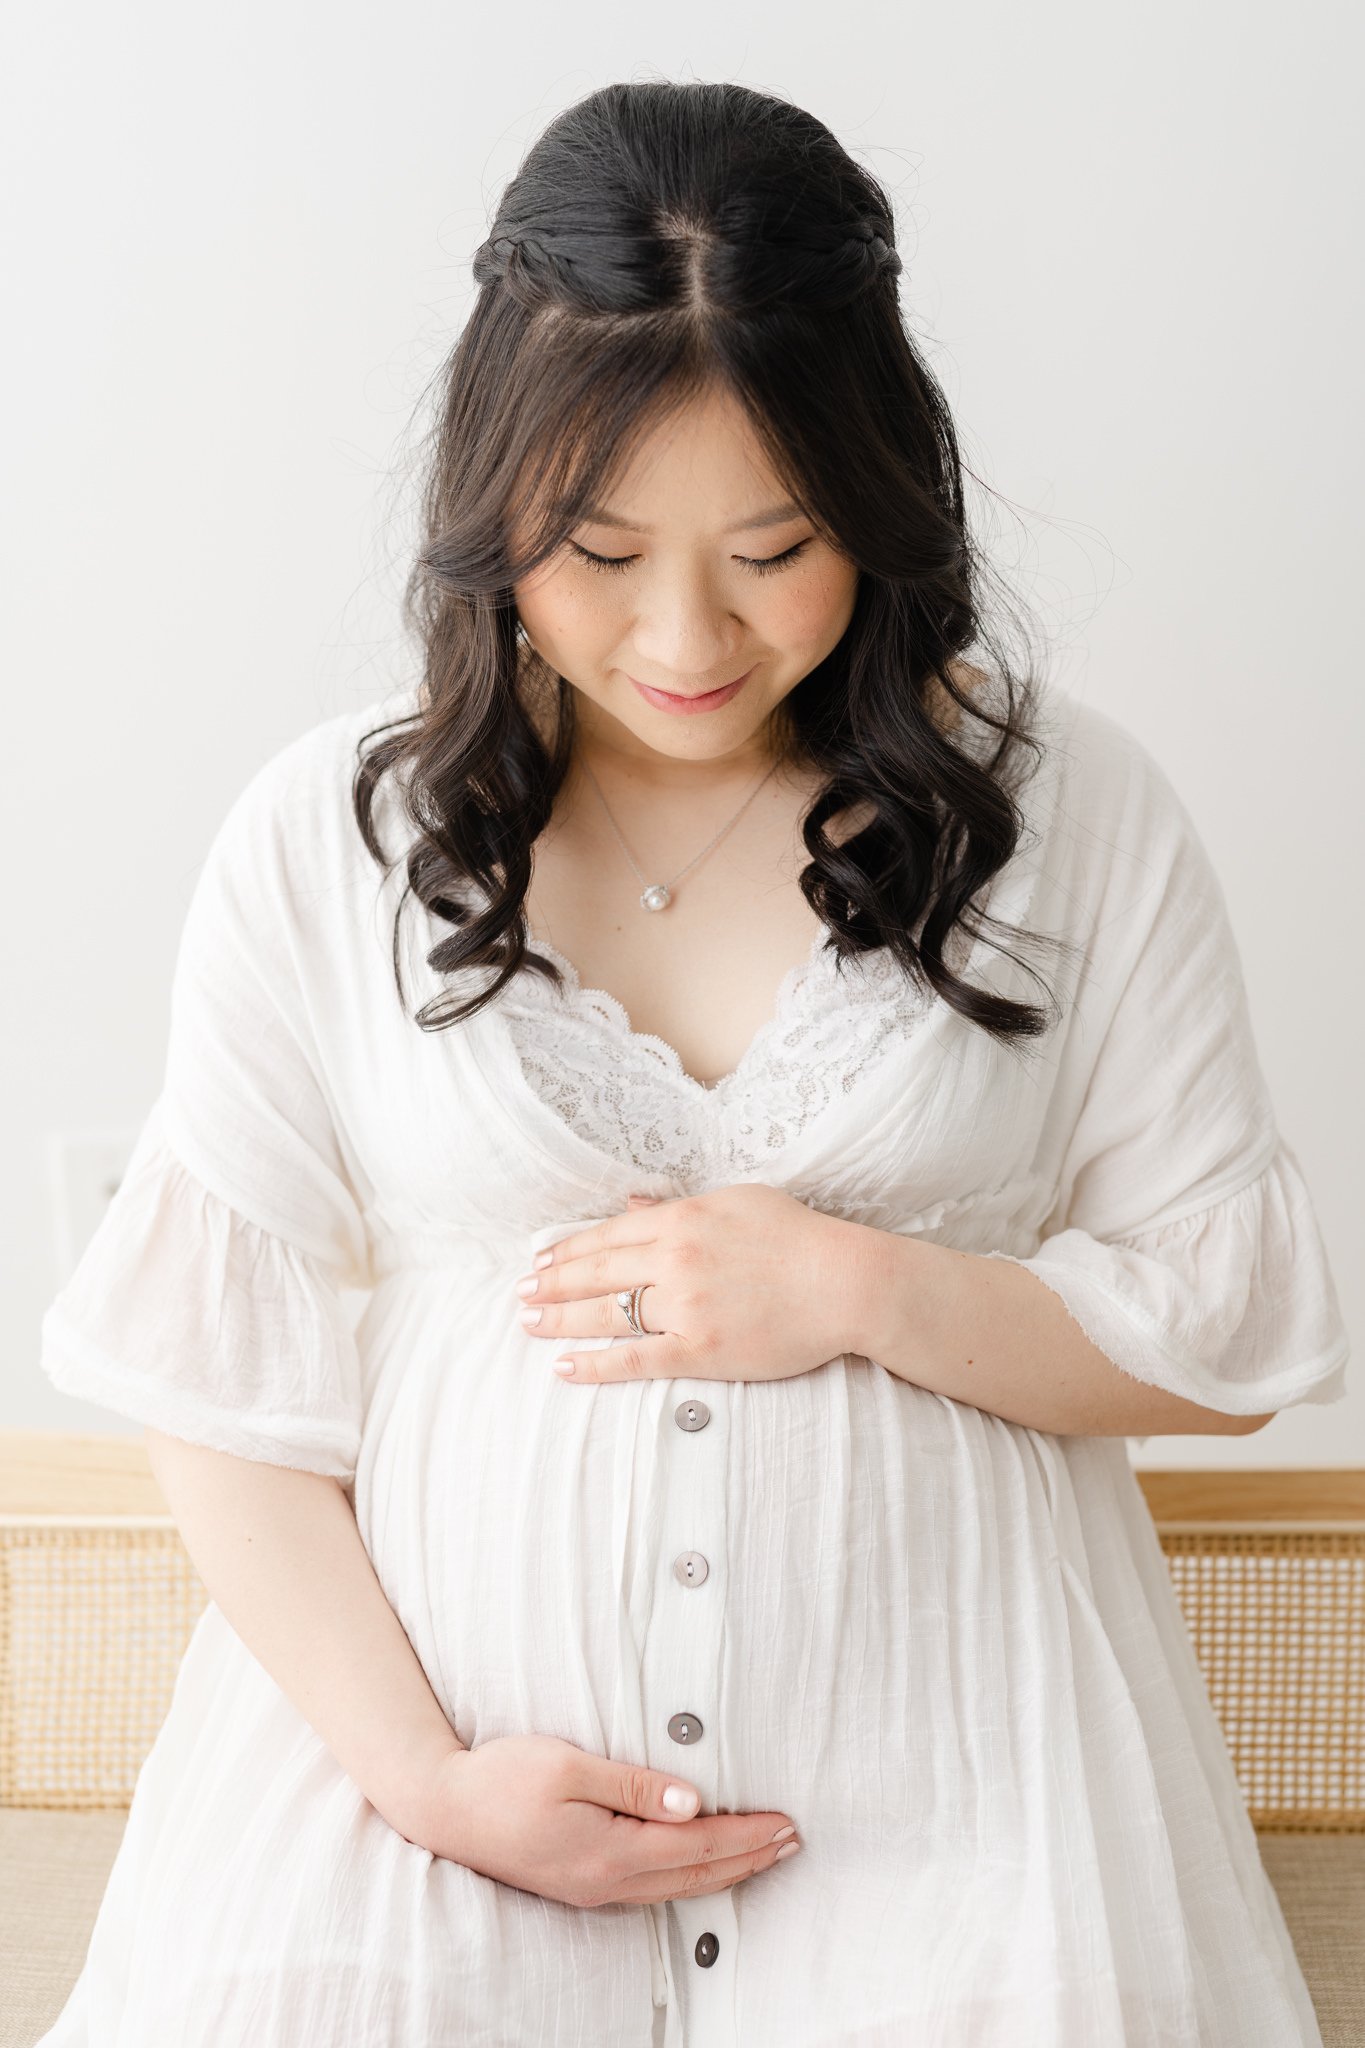  A close-up portrait of an Asian mother holding her baby bump in studio maternity portraits with Nicole Hawkins Photography. white maternity dress outfit inspiration #NicoleHawkinsPhotography #NicoleHawkinsMaternity #MaternityPhotography #Maternityst